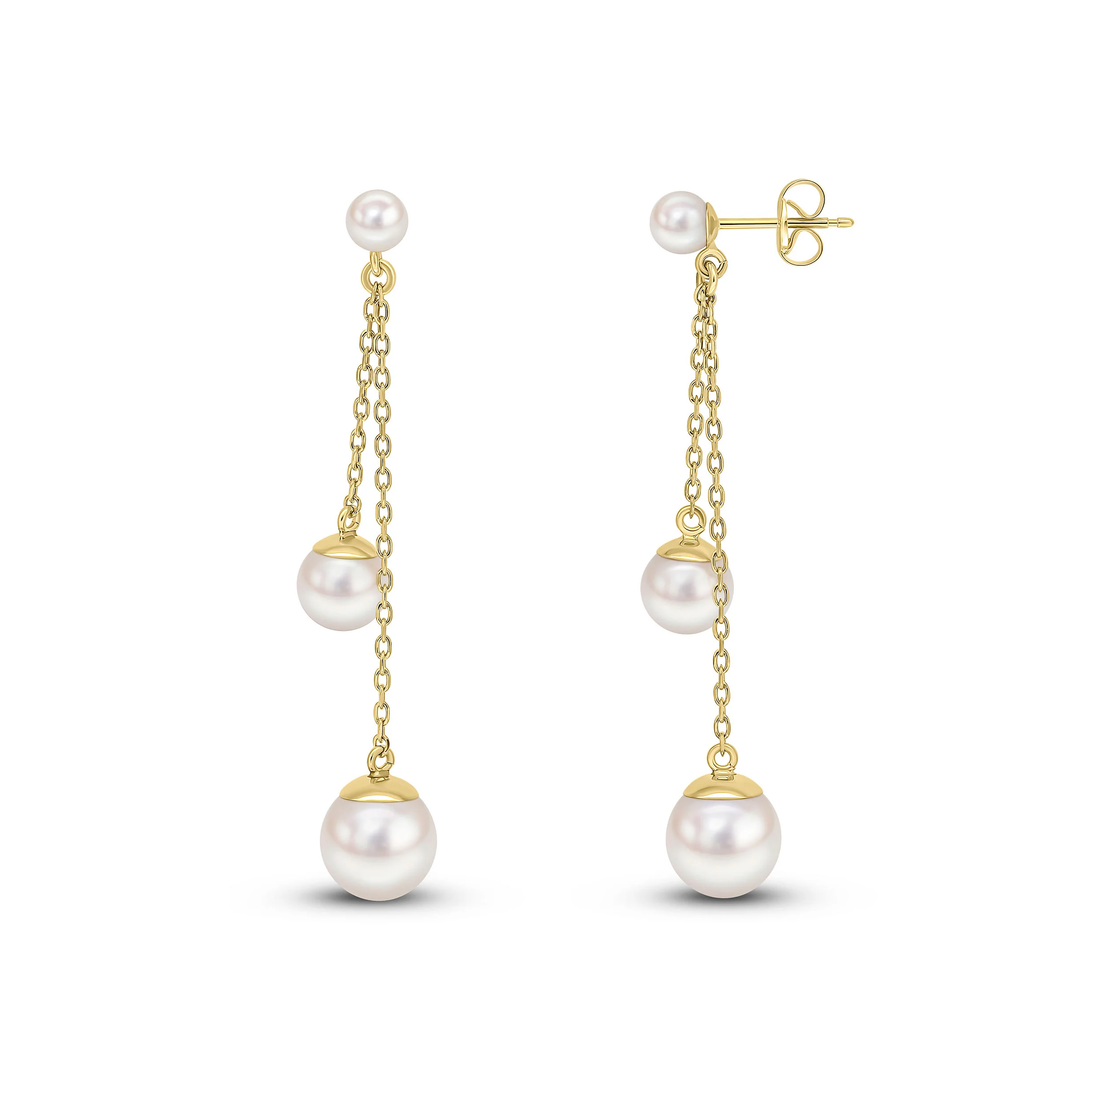 9CT Yellow Gold Chain Drop Earrings with 4mm, 6mm and 8mm Pearls - Robert Anthony Jewellers, Edinburgh